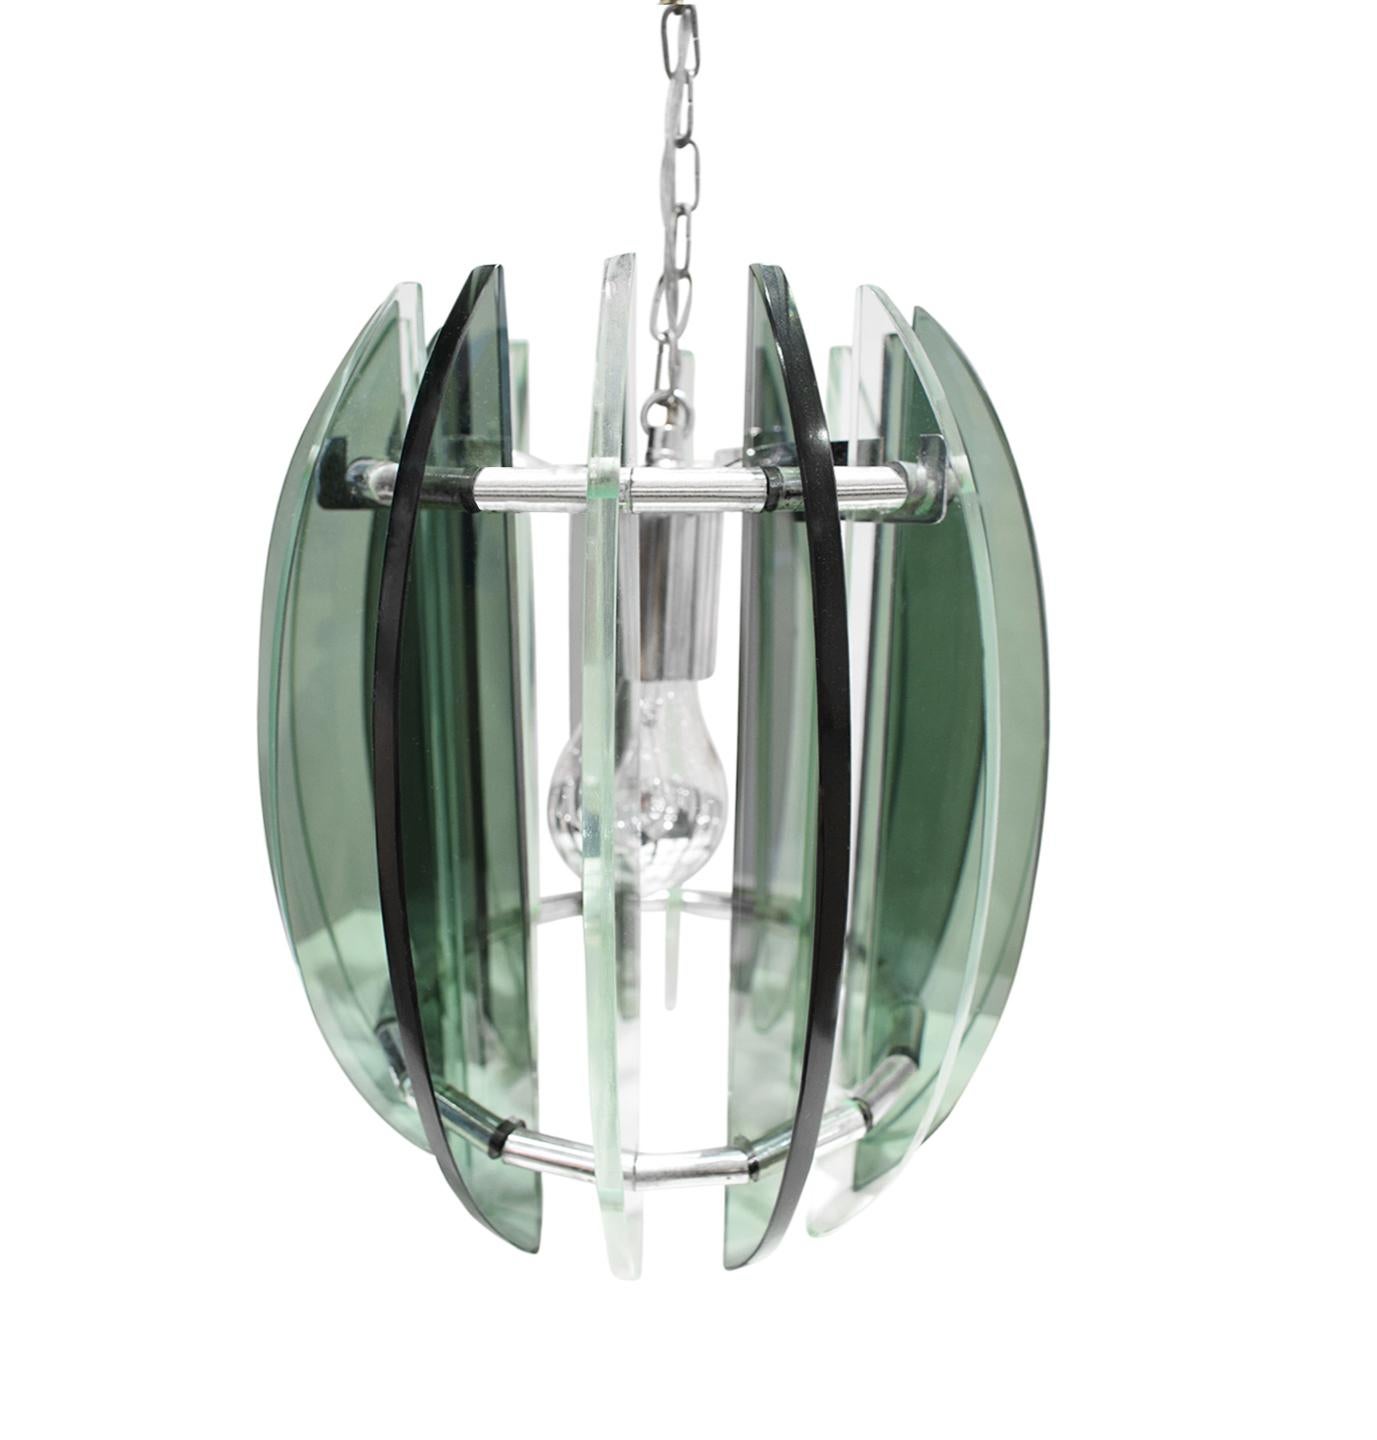 Chandelier in chrome with light and dark green glass in the style of Fontana Arte, Italian 1970s. The height of just the chandelier itself without the chain is 11 inches high. The overall height can be customized with a chain or rod. As currently